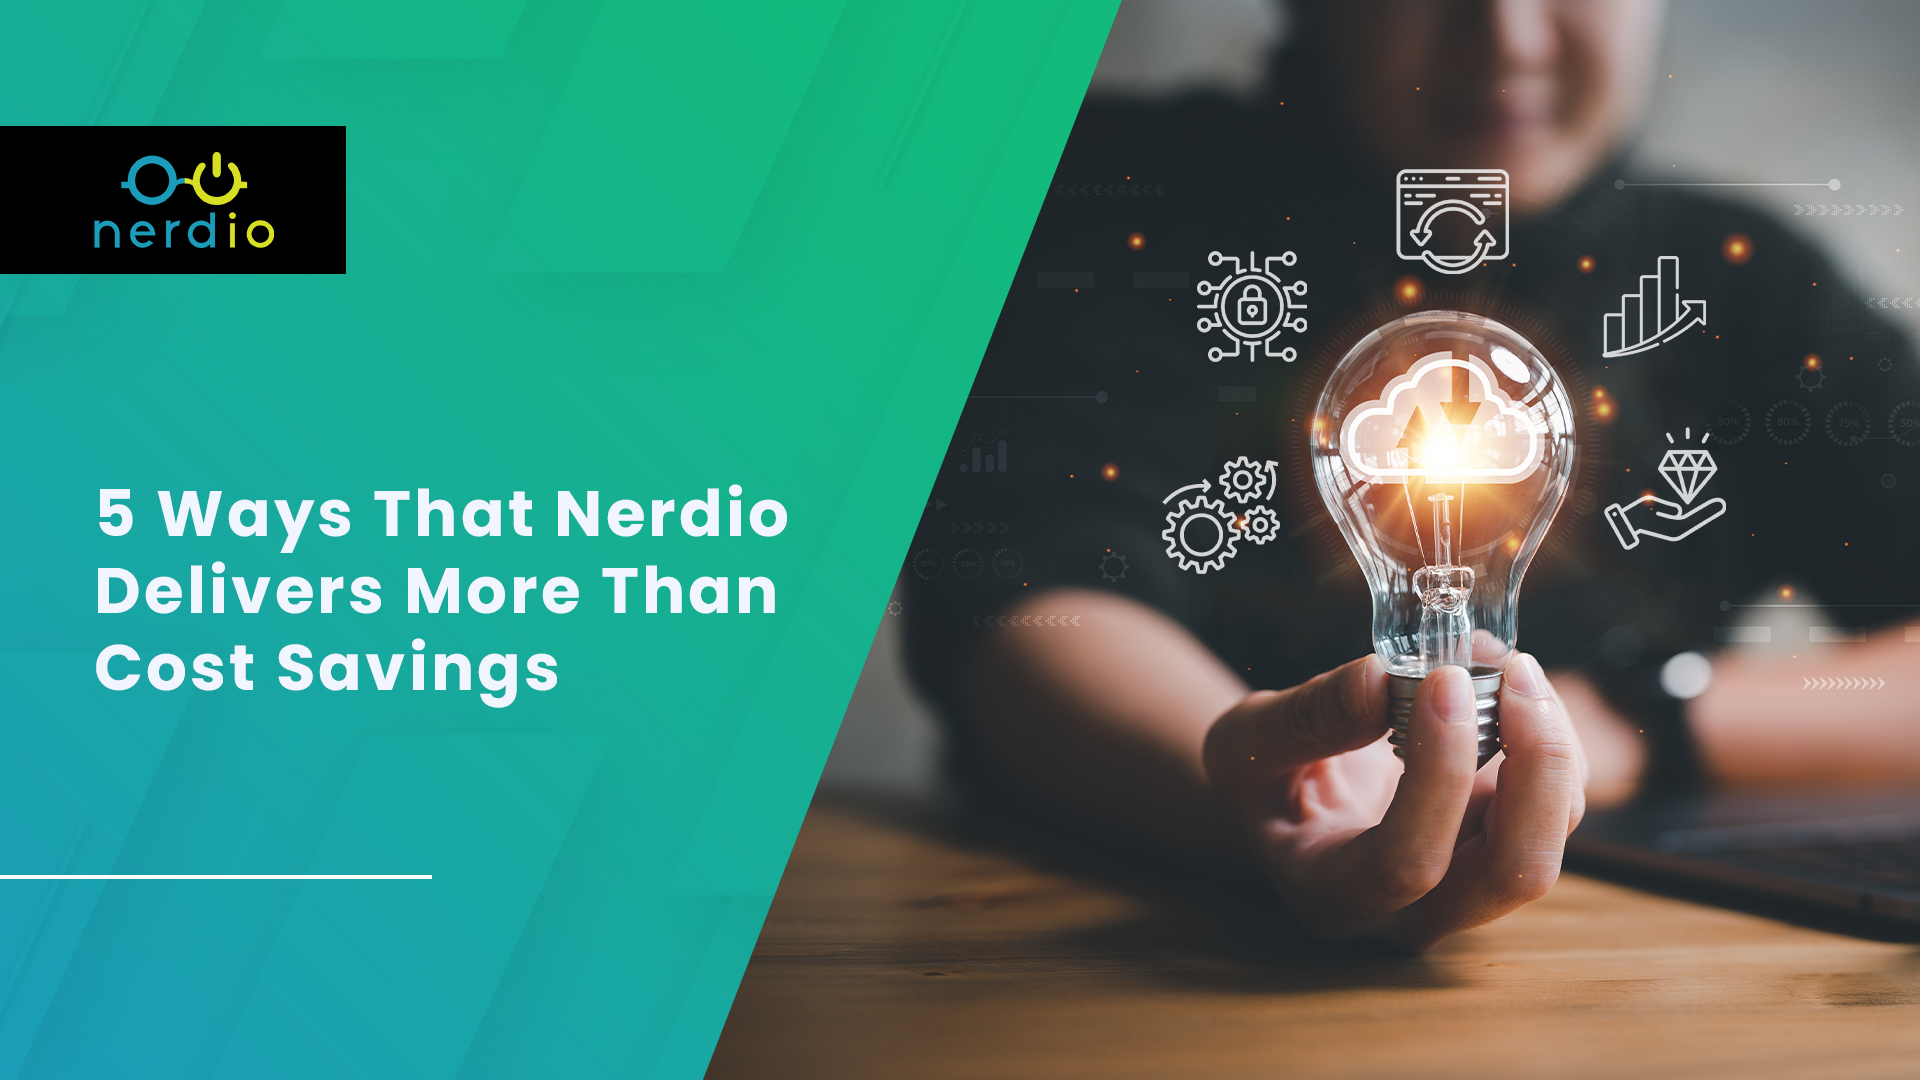 5 ways that Nerdio delivers more than cost savings